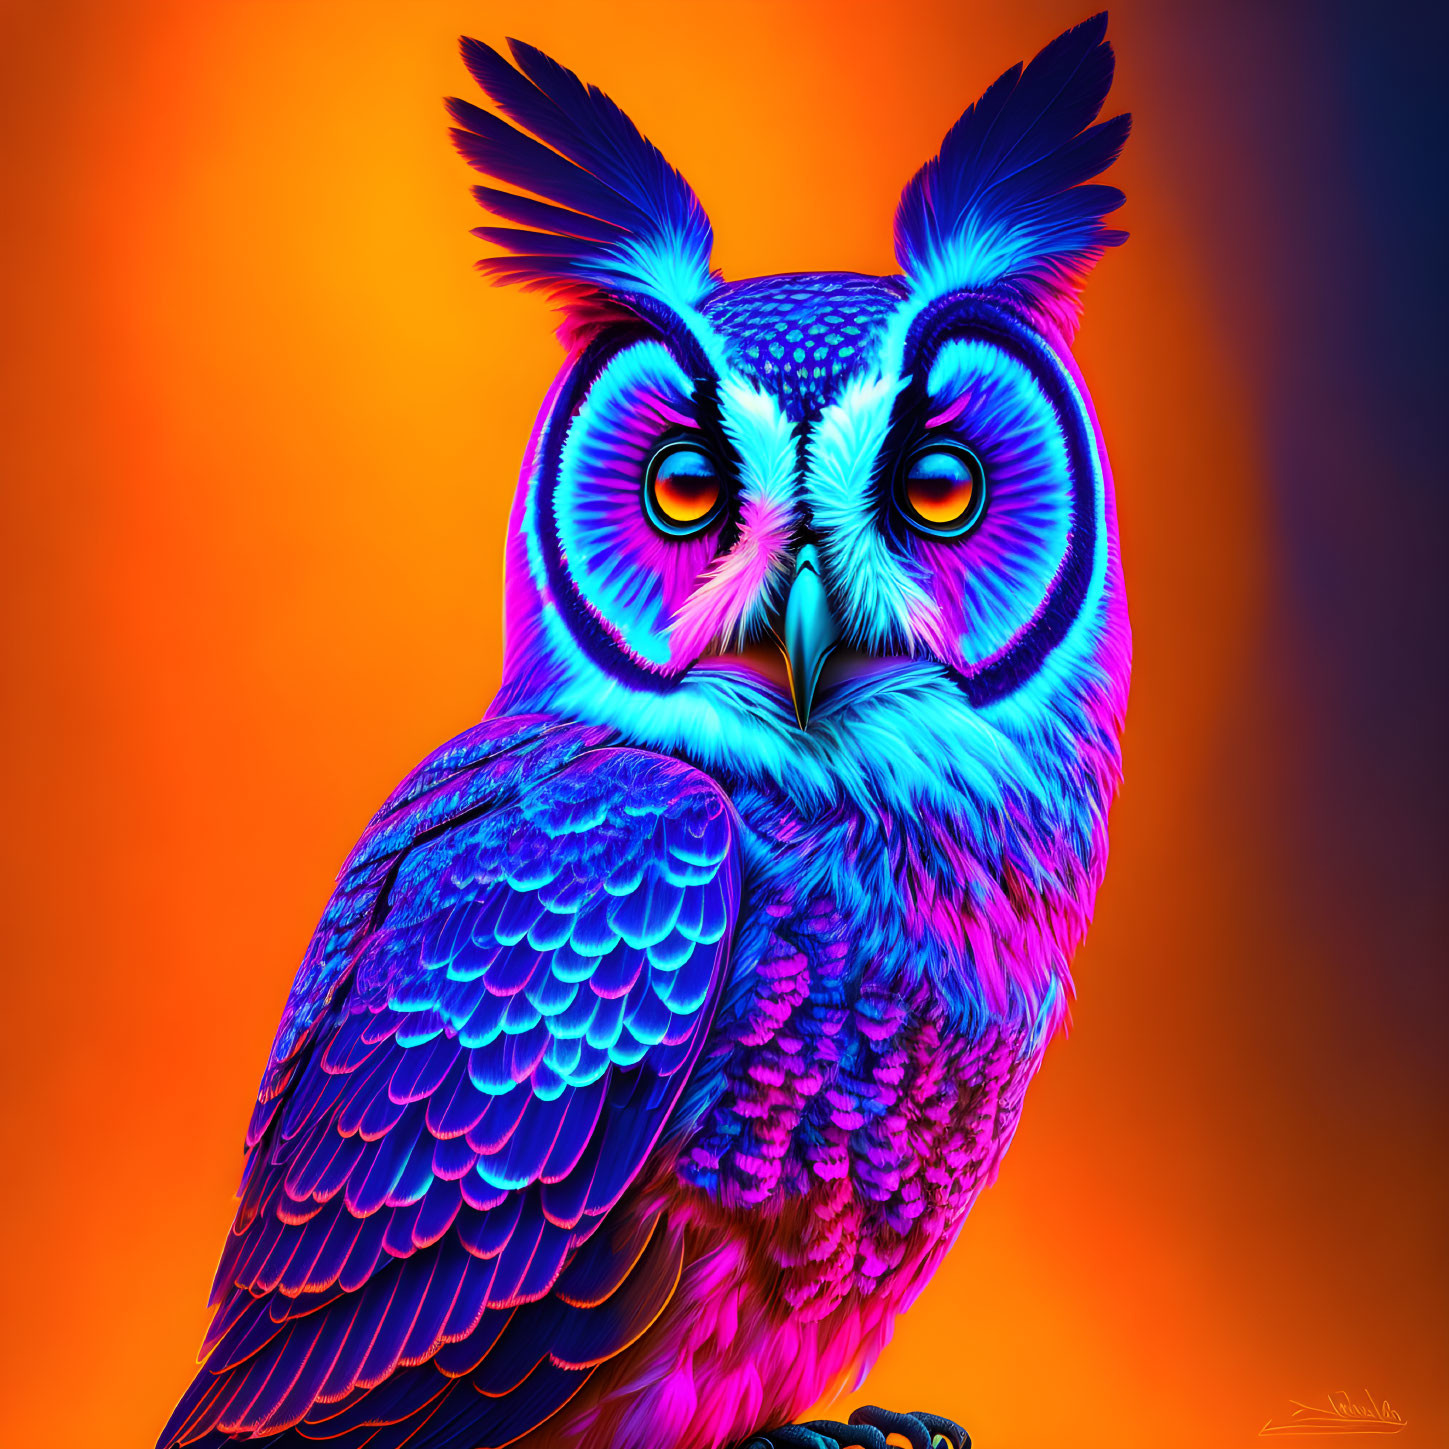 Colorful Owl Artwork with Blue and Purple Feathers on Warm Background